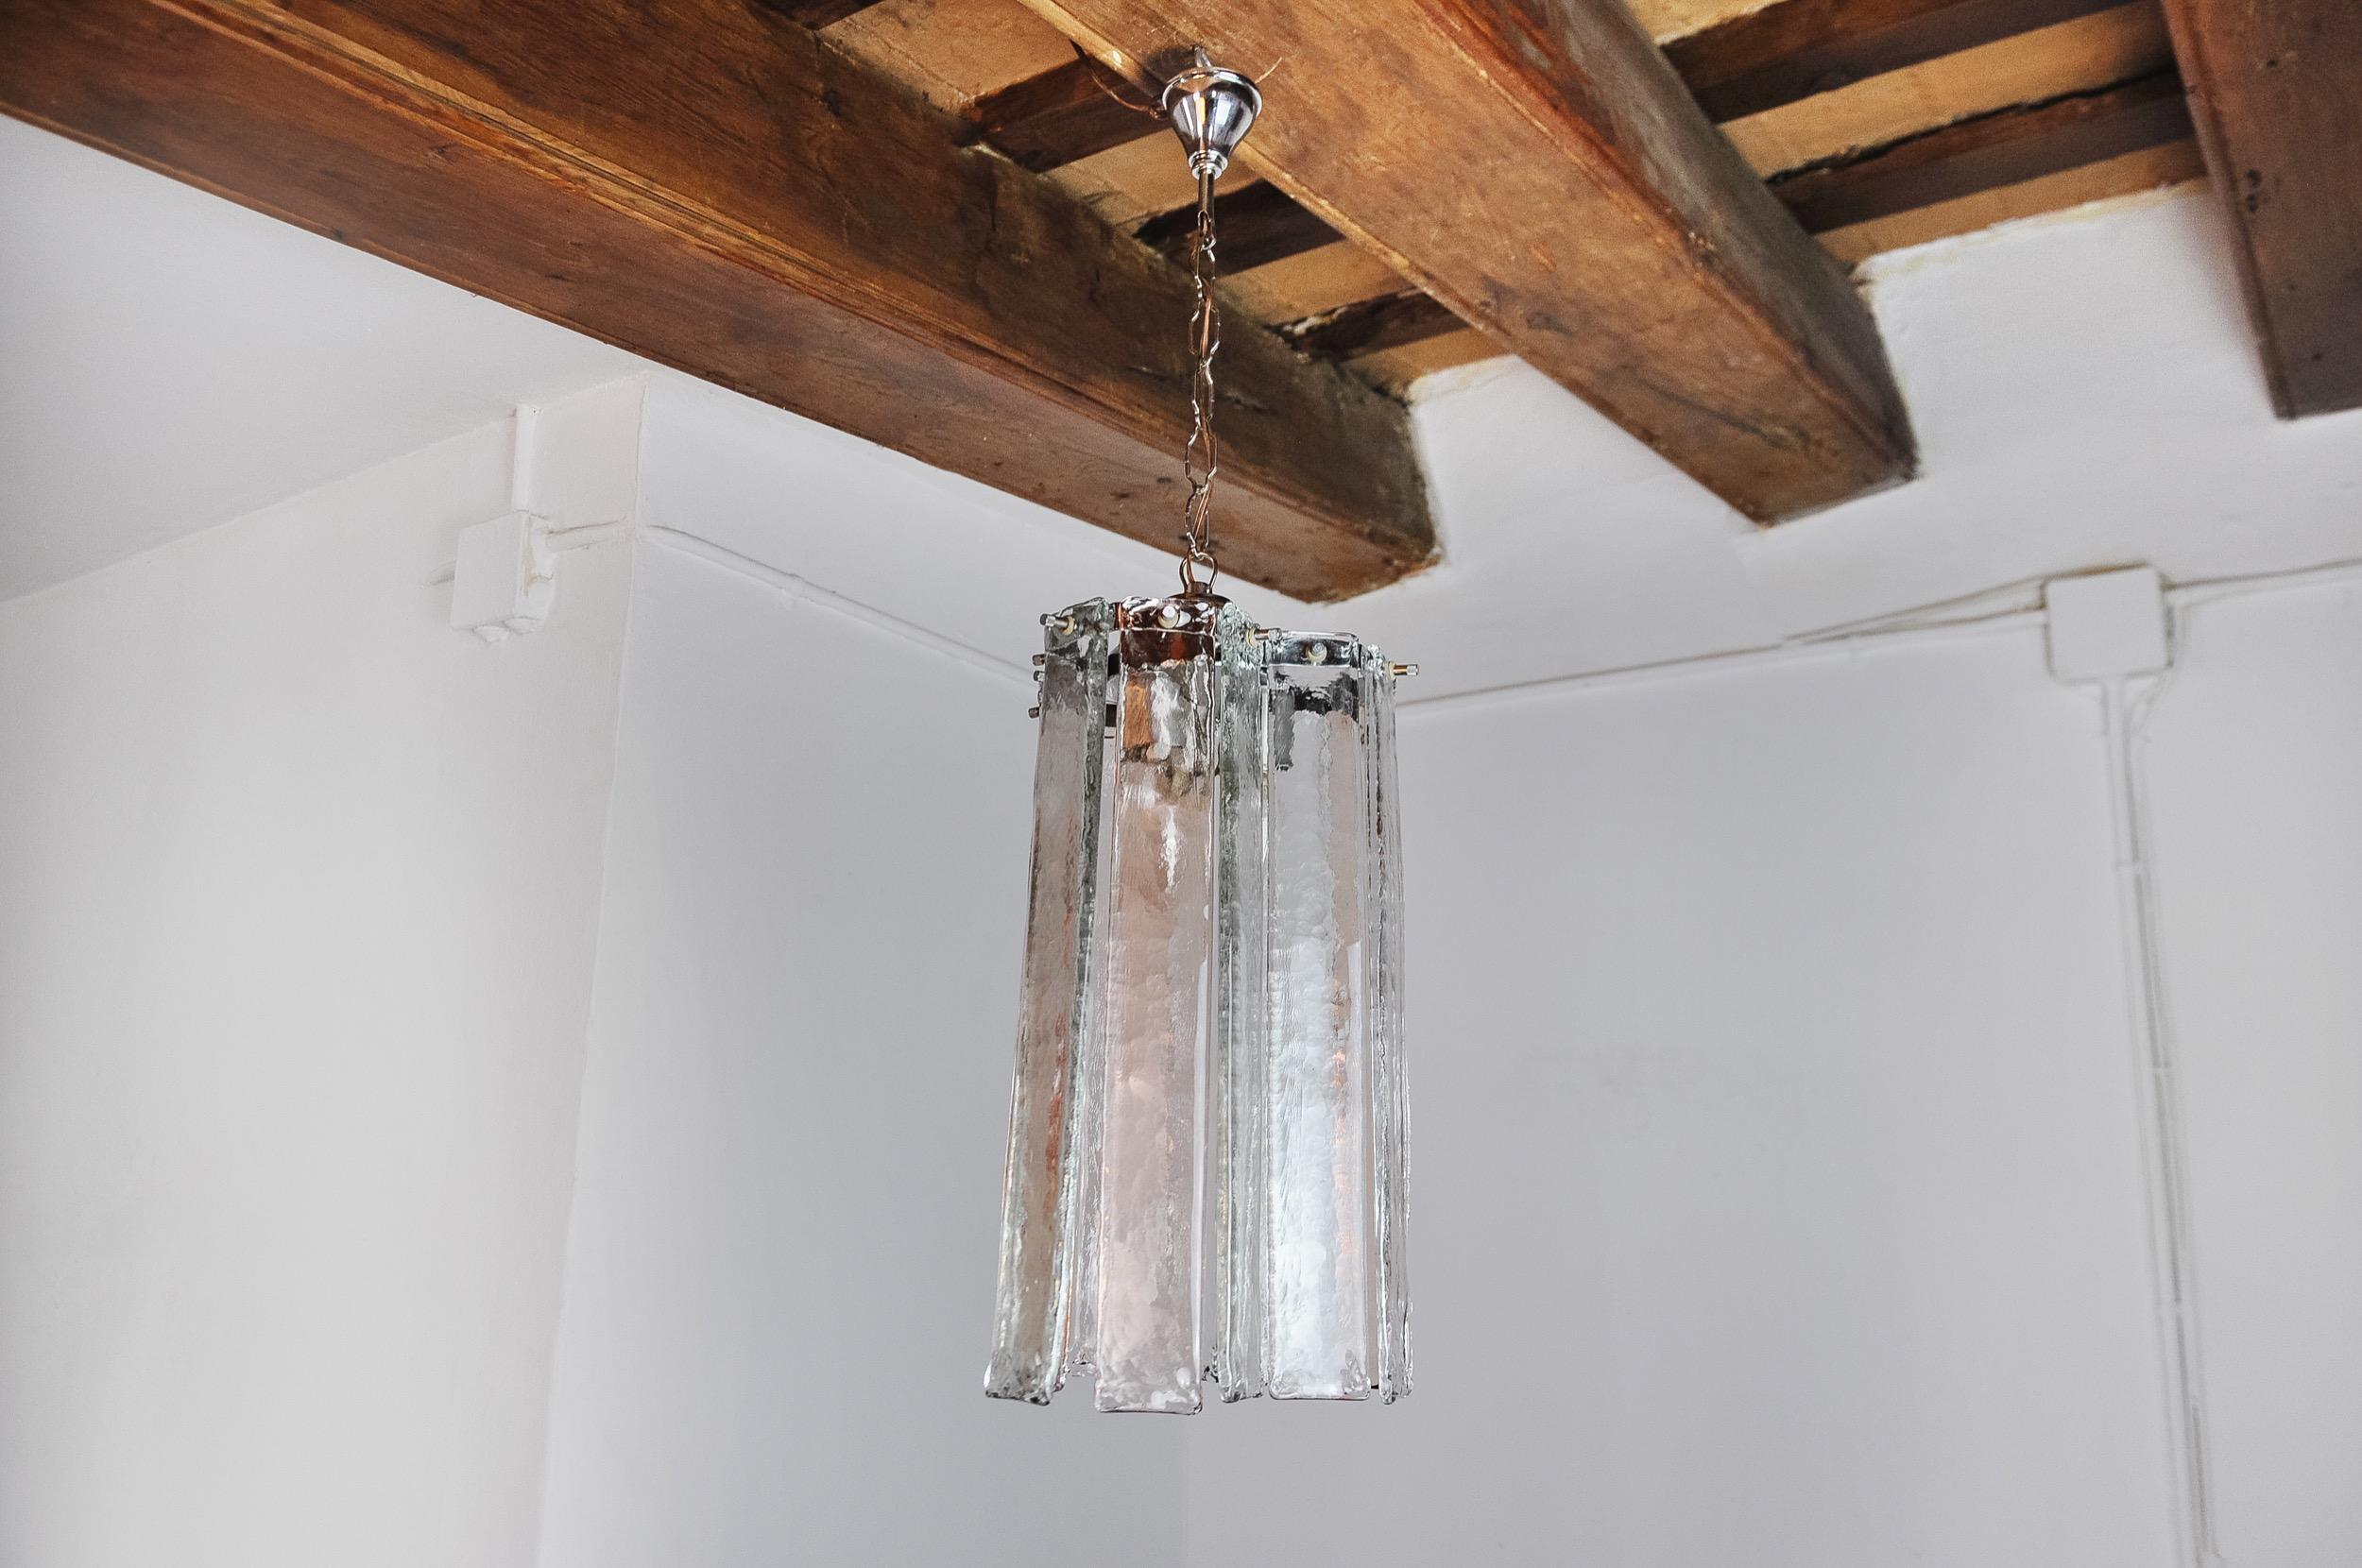 Hollywood Regency Poliarte pendant lamp by albano poli, pink and transparent murano glass, italy For Sale